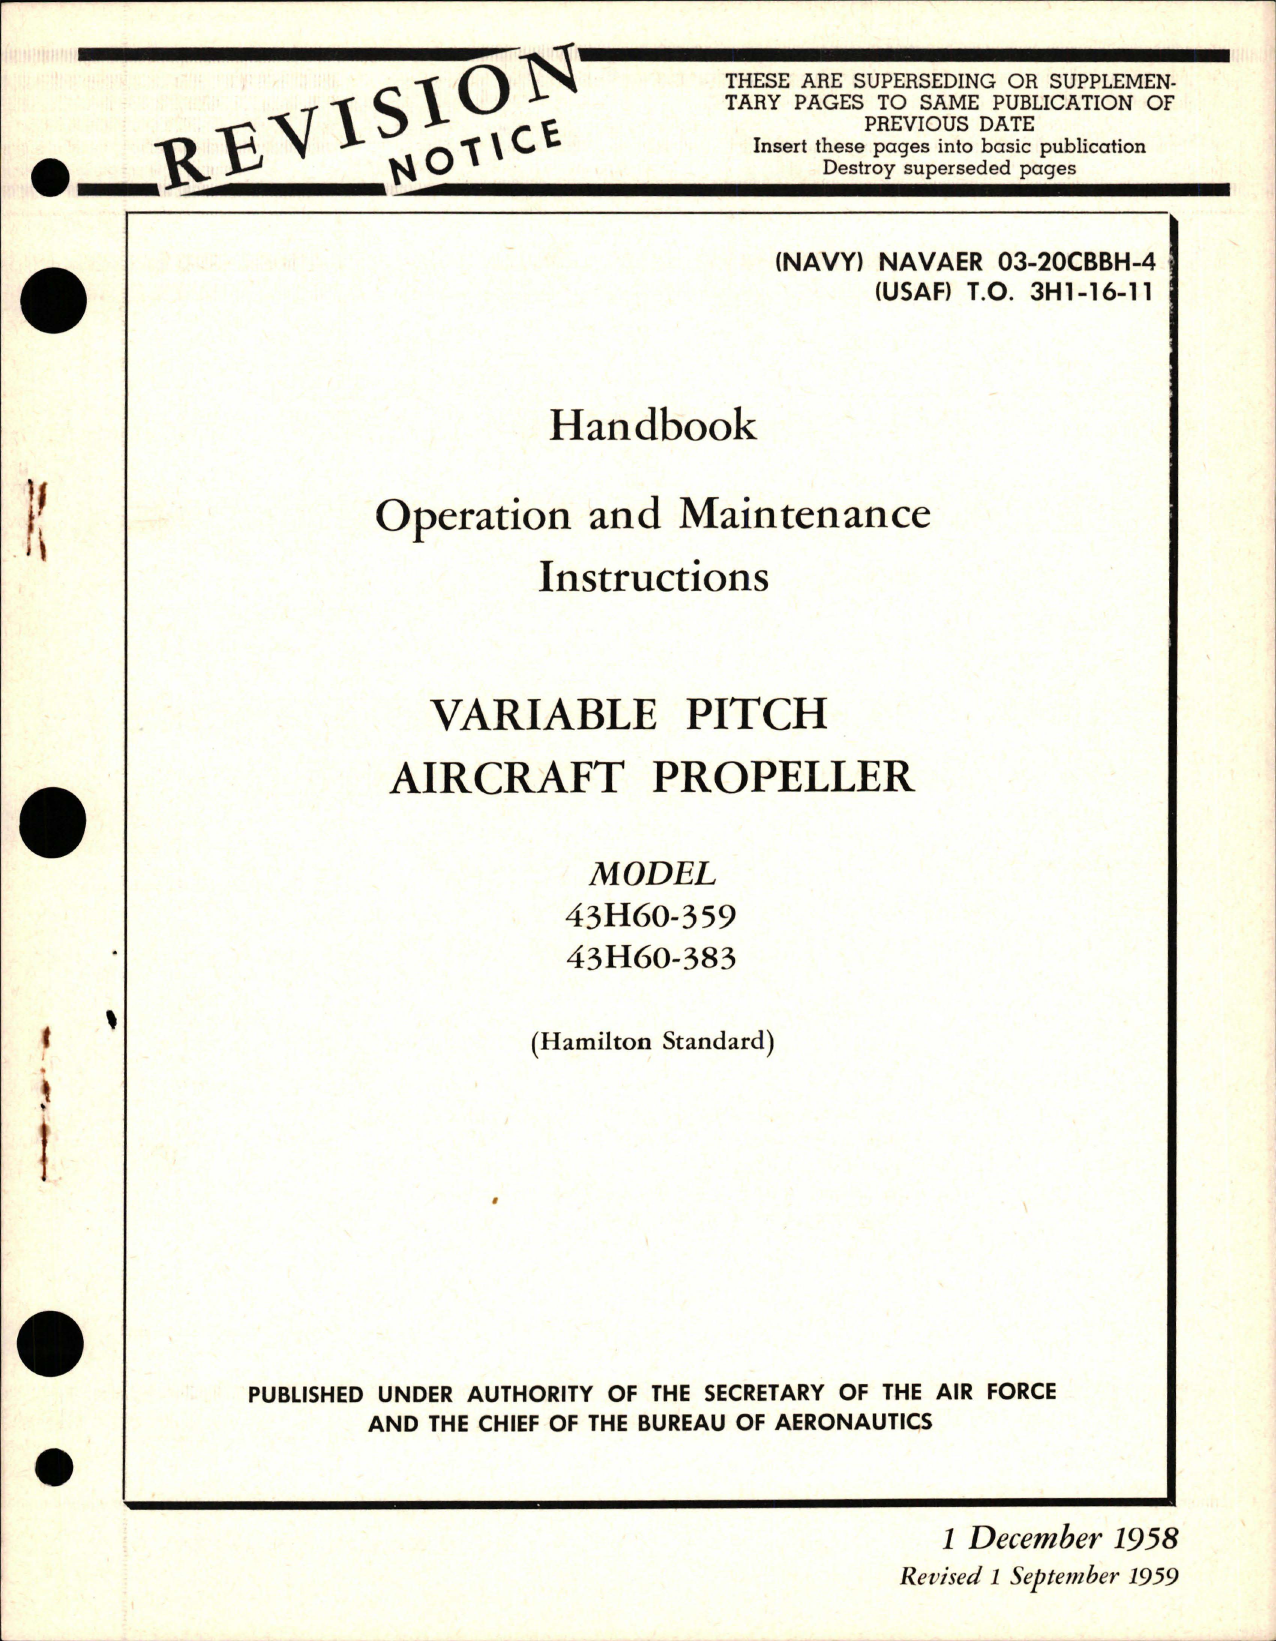 Sample page 1 from AirCorps Library document: Operation and Maintenance Instructions for Variable Pitch Propeller - Model 43H60-359 and 43H60-383